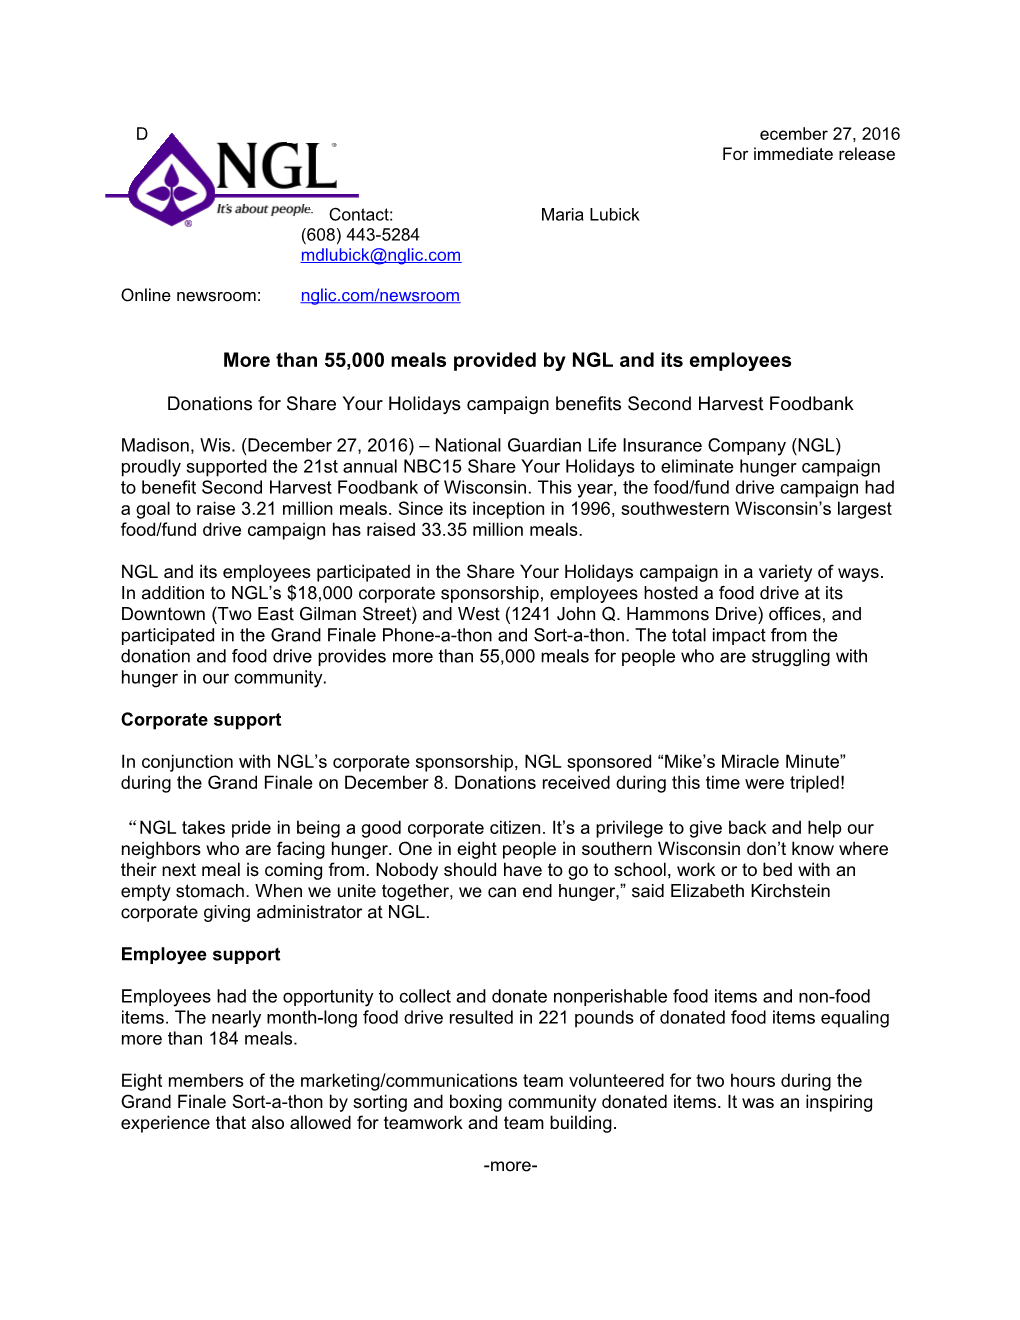 More Than 55,000 Meals Provided by NGL and Its Employees